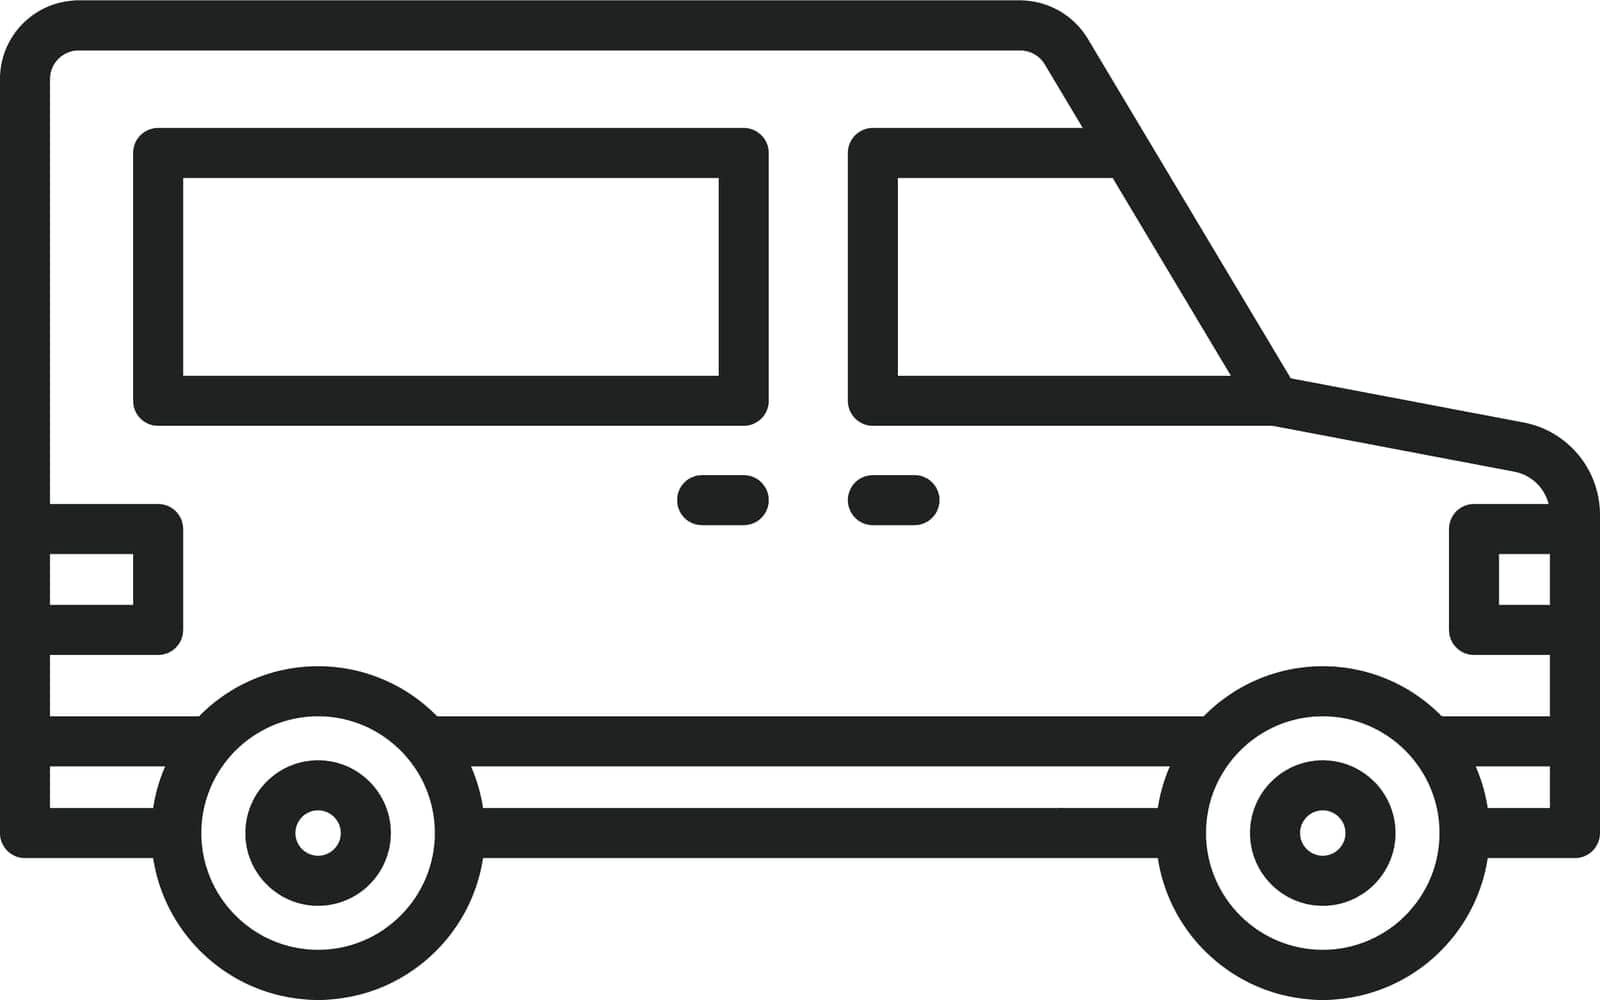 Van icon vector image. Suitable for mobile application web application and print media.